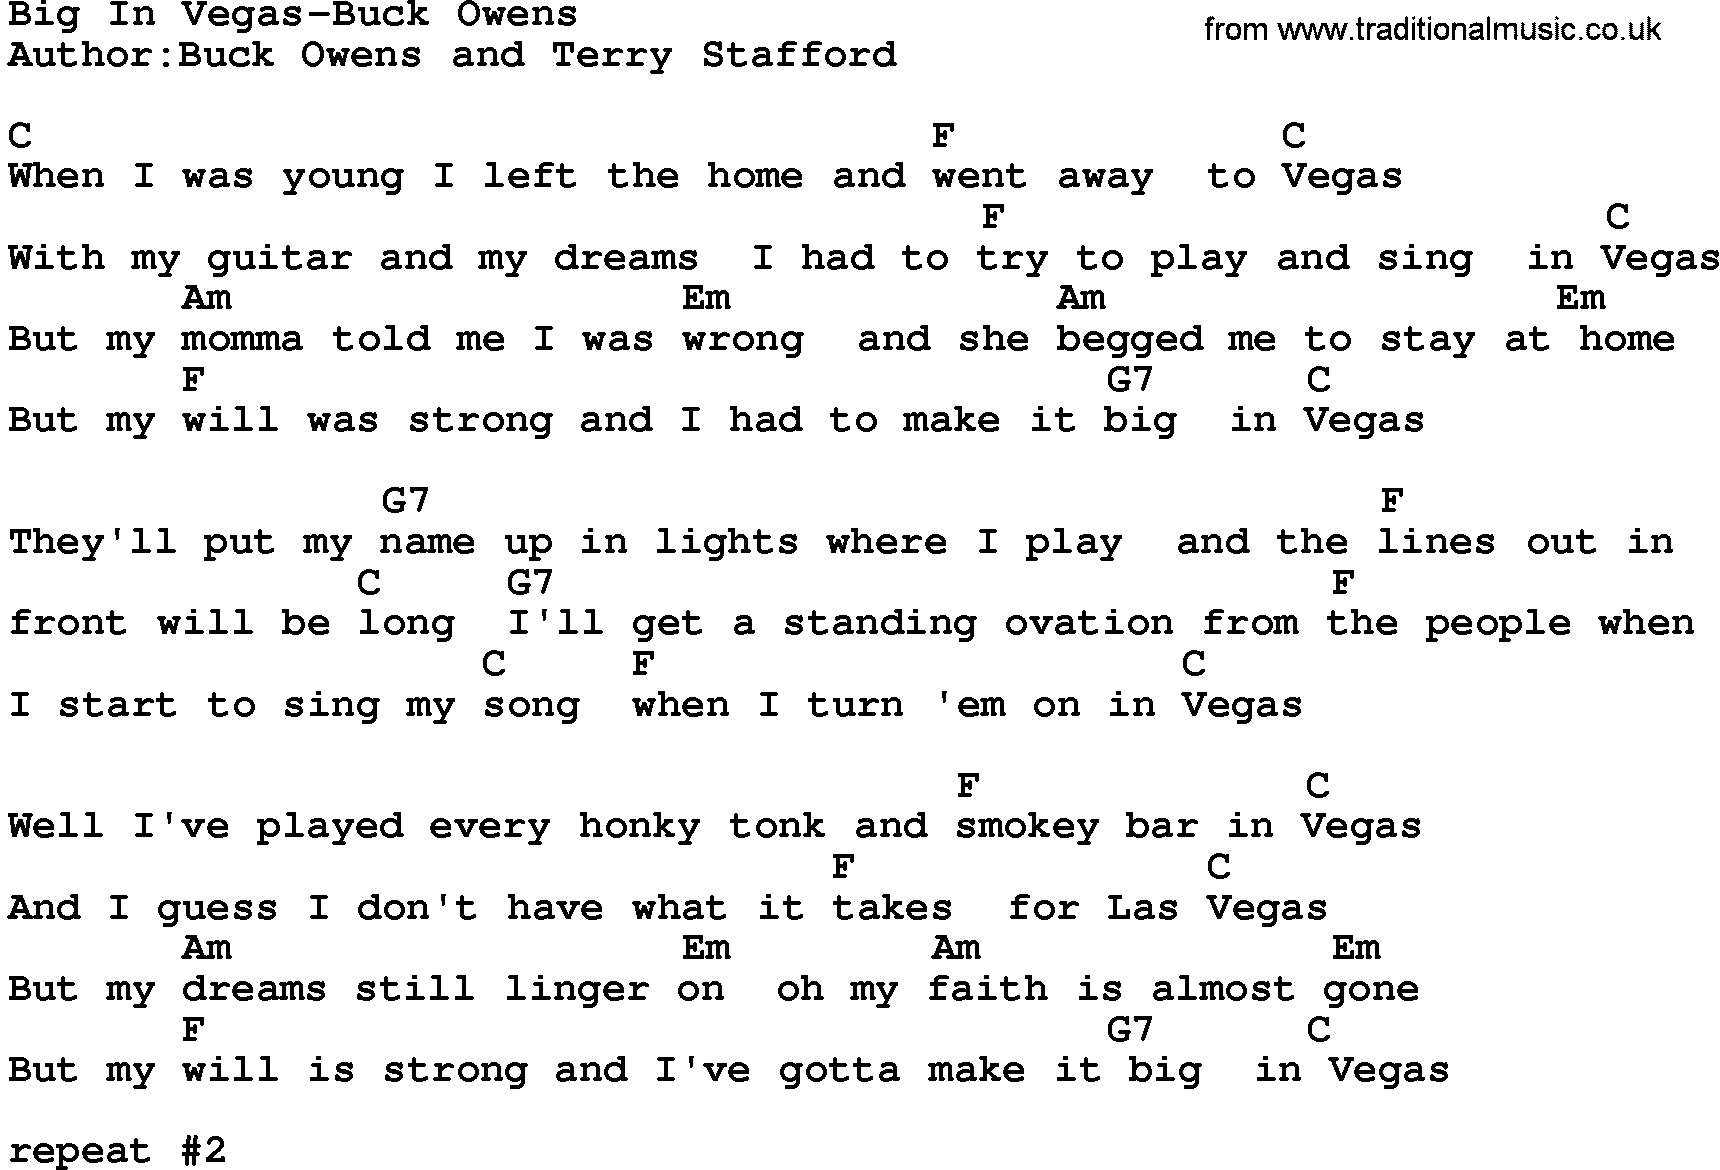 Country music song: Big In Vegas-Buck Owens lyrics and chords